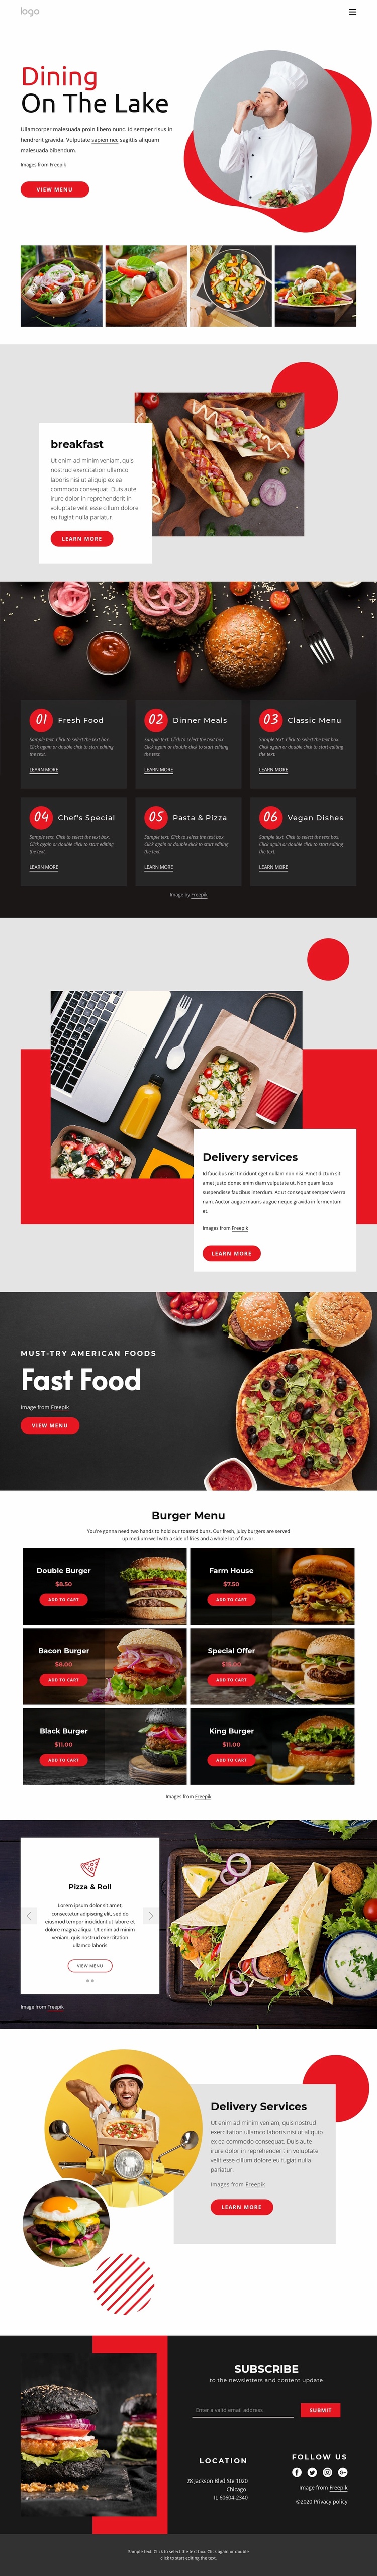 Dining on the lake Website Template